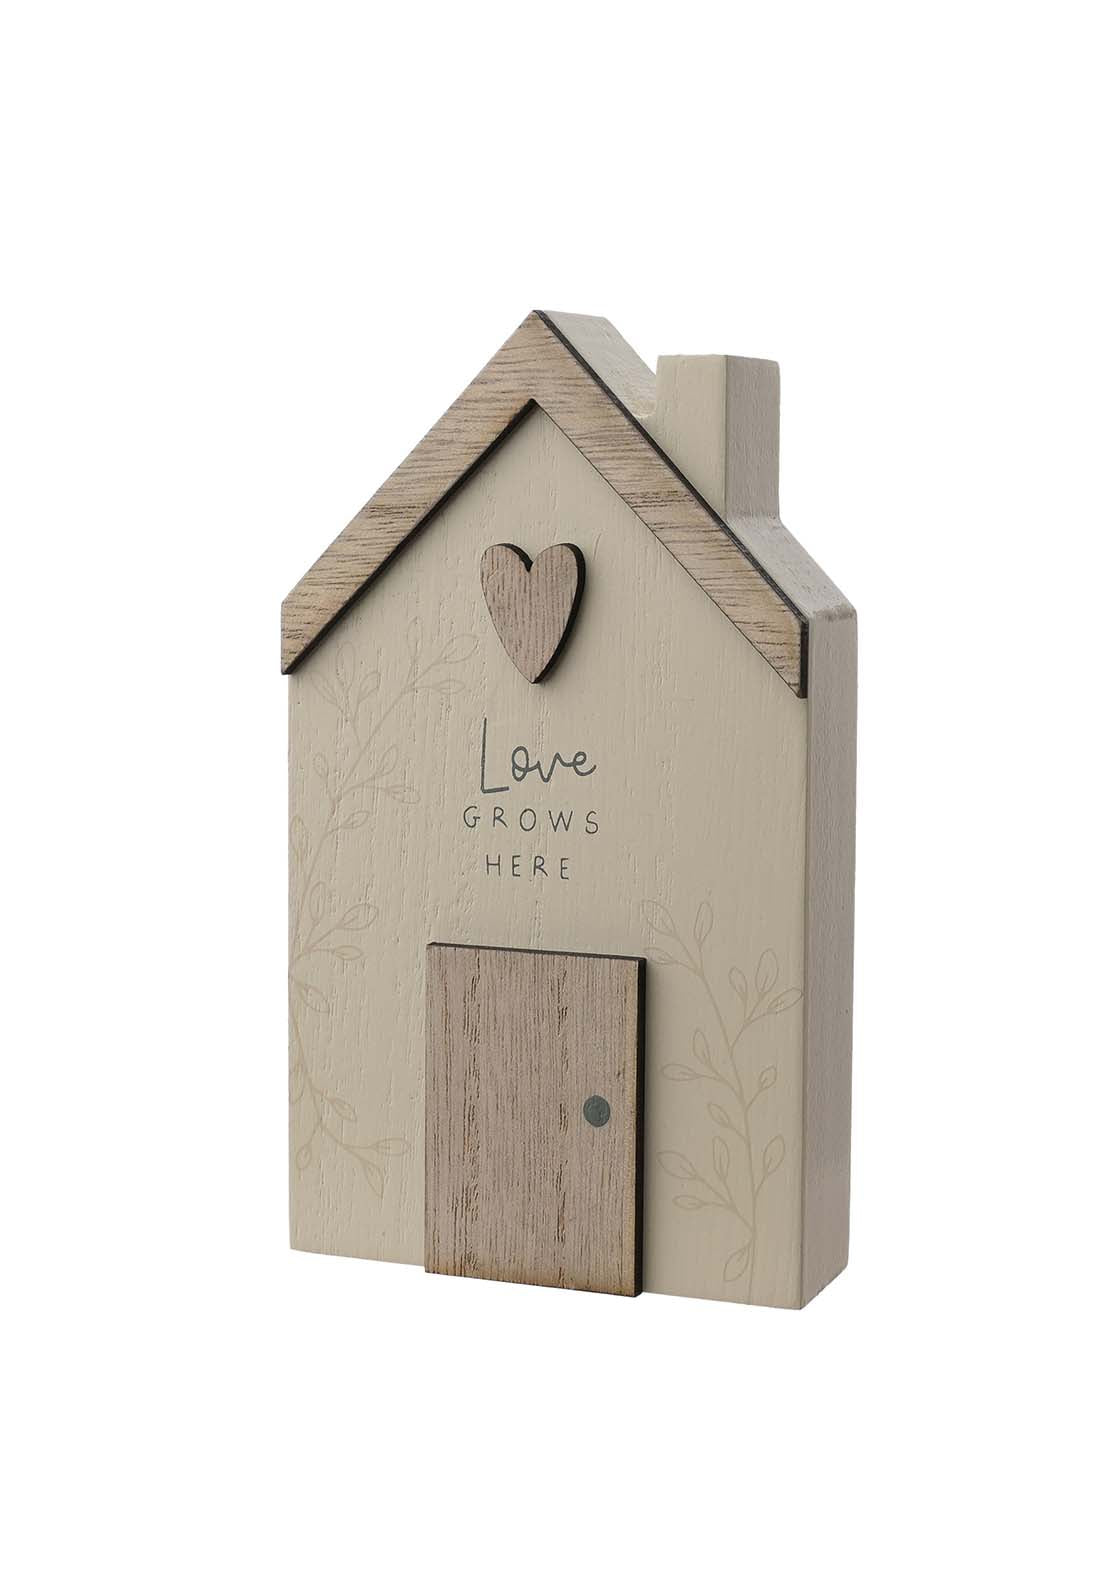 The Home Collection Mini House - Love Grows Here 1 Shaws Department Stores